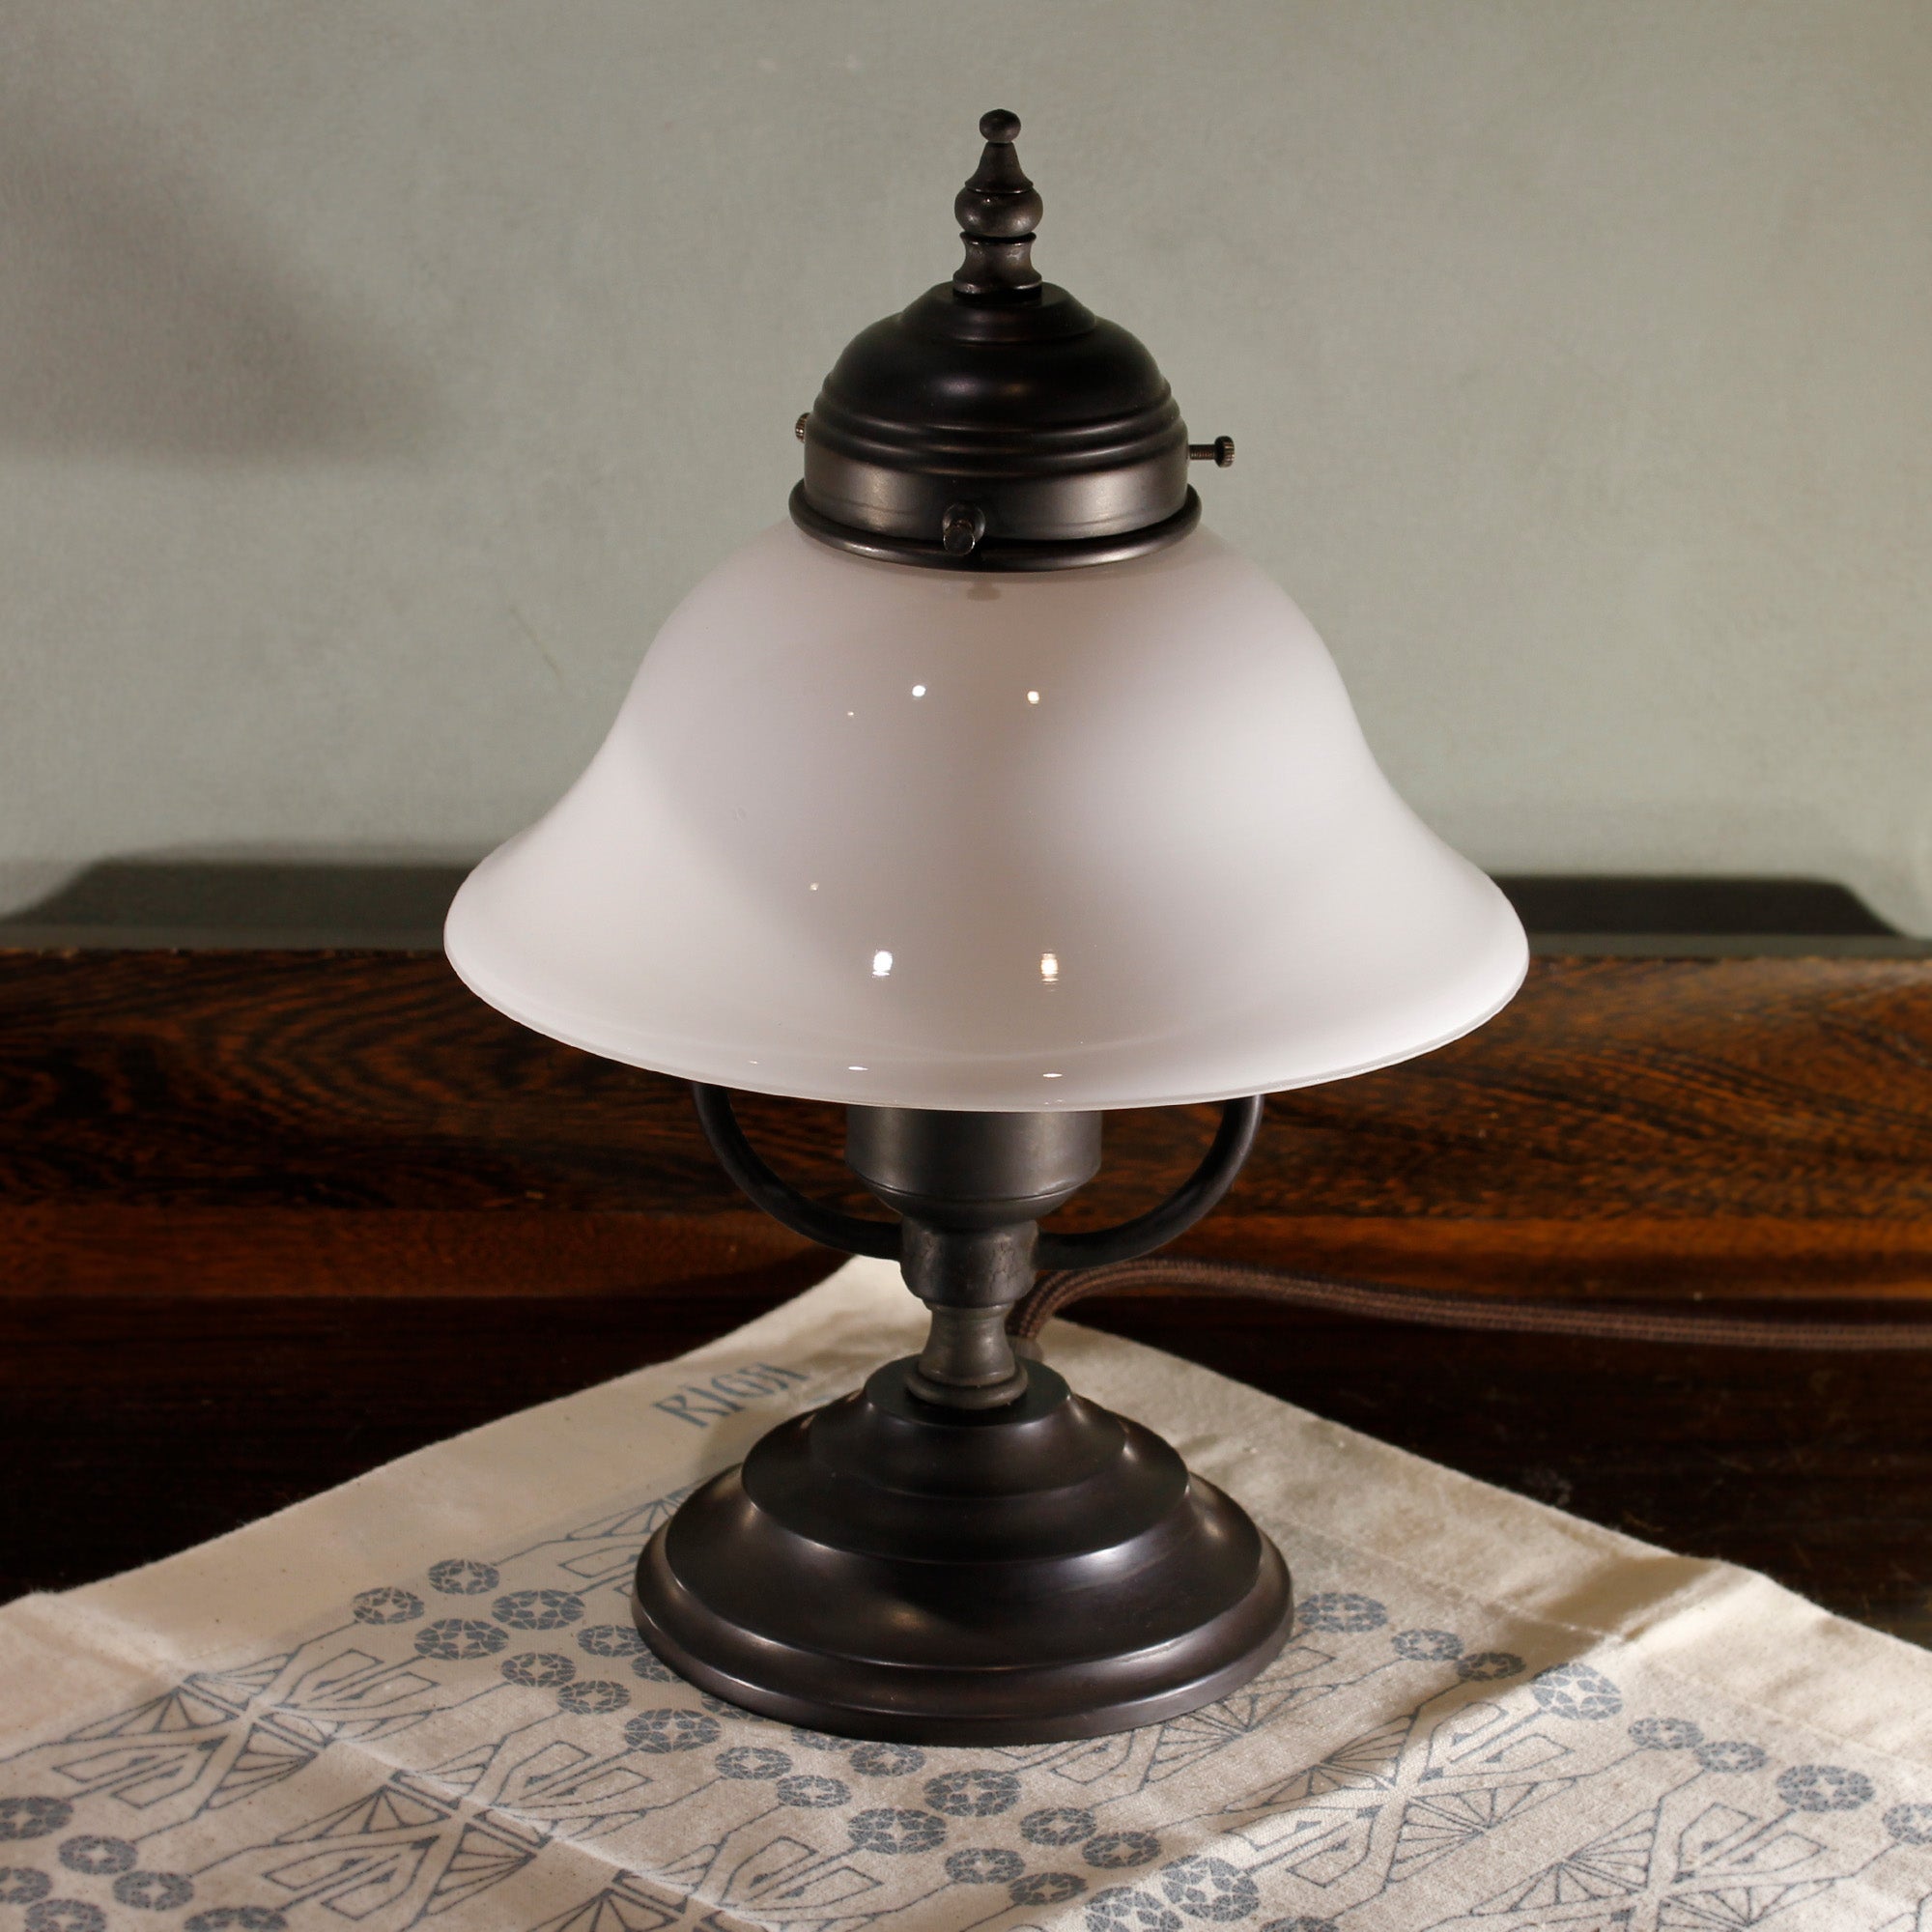 Small Table Lamp "Black"